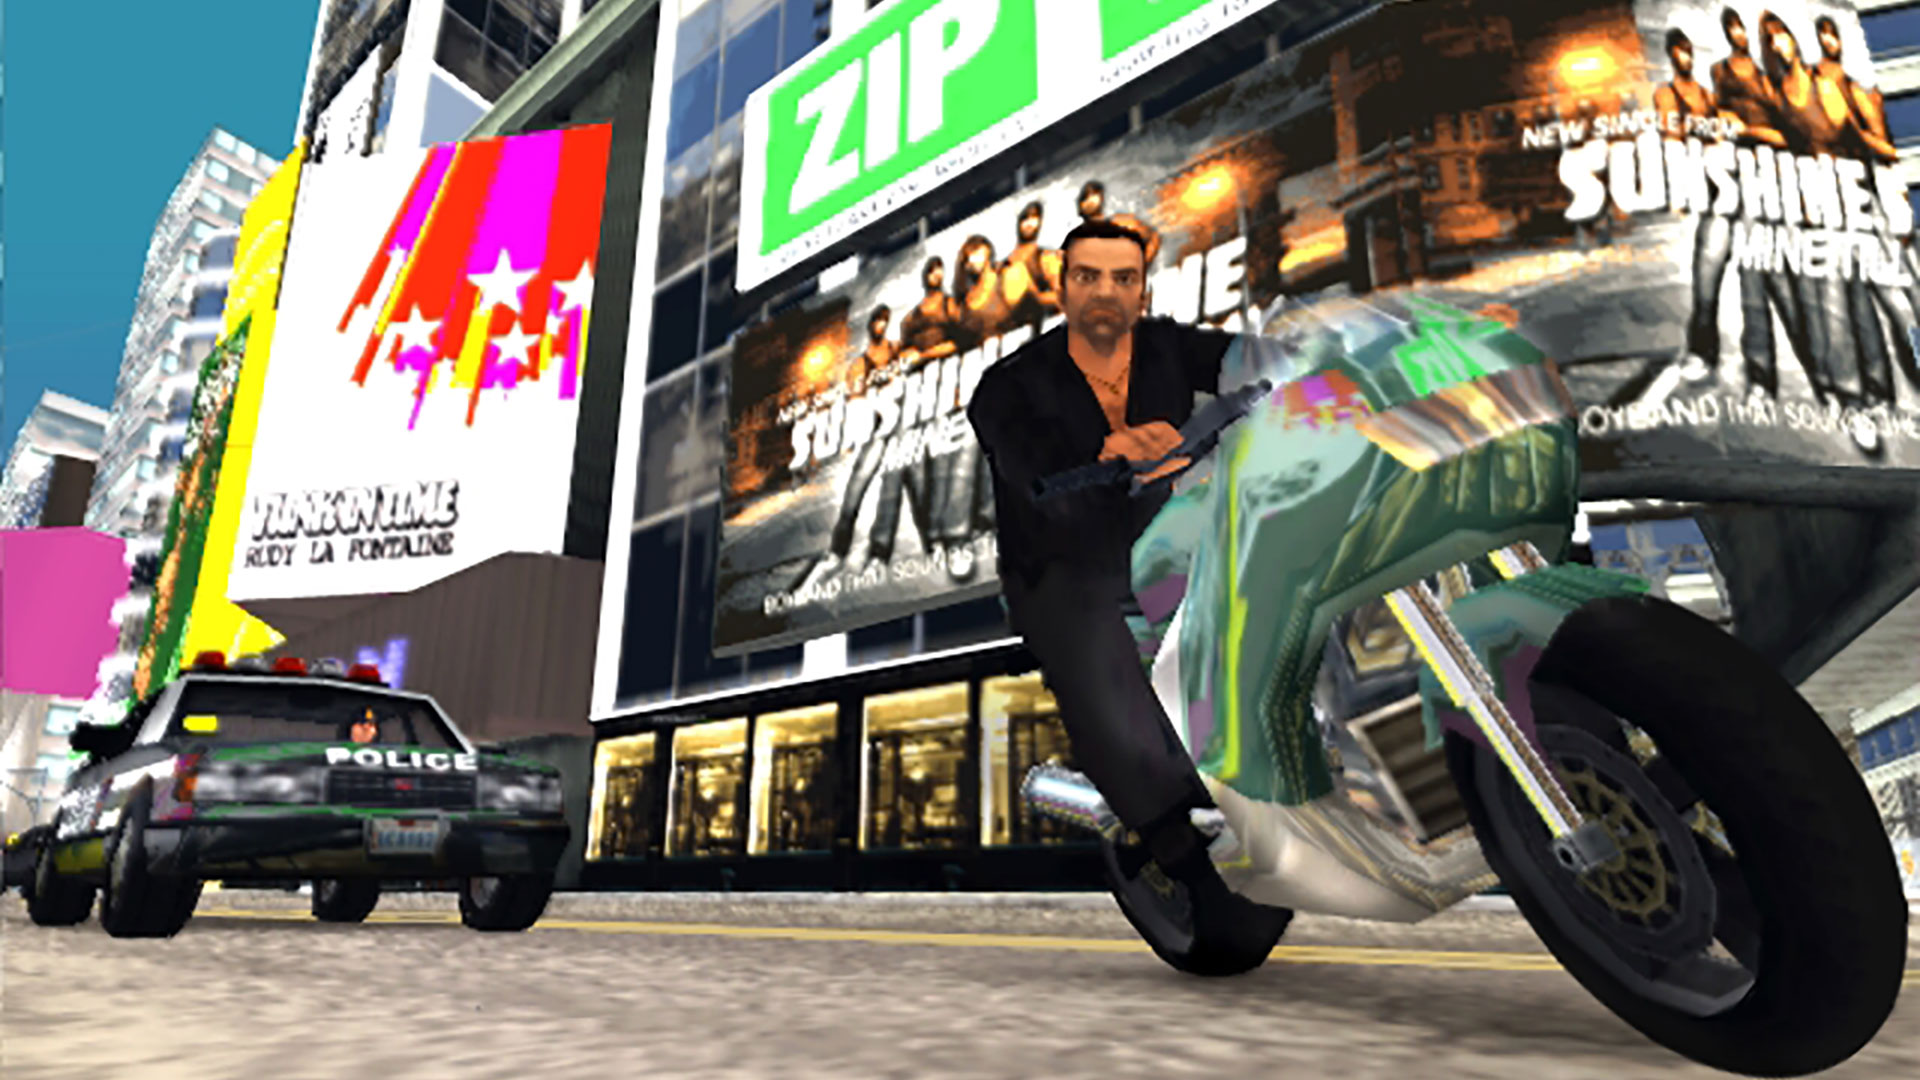 GTA Liberty City Stories: All cheat codes for PC